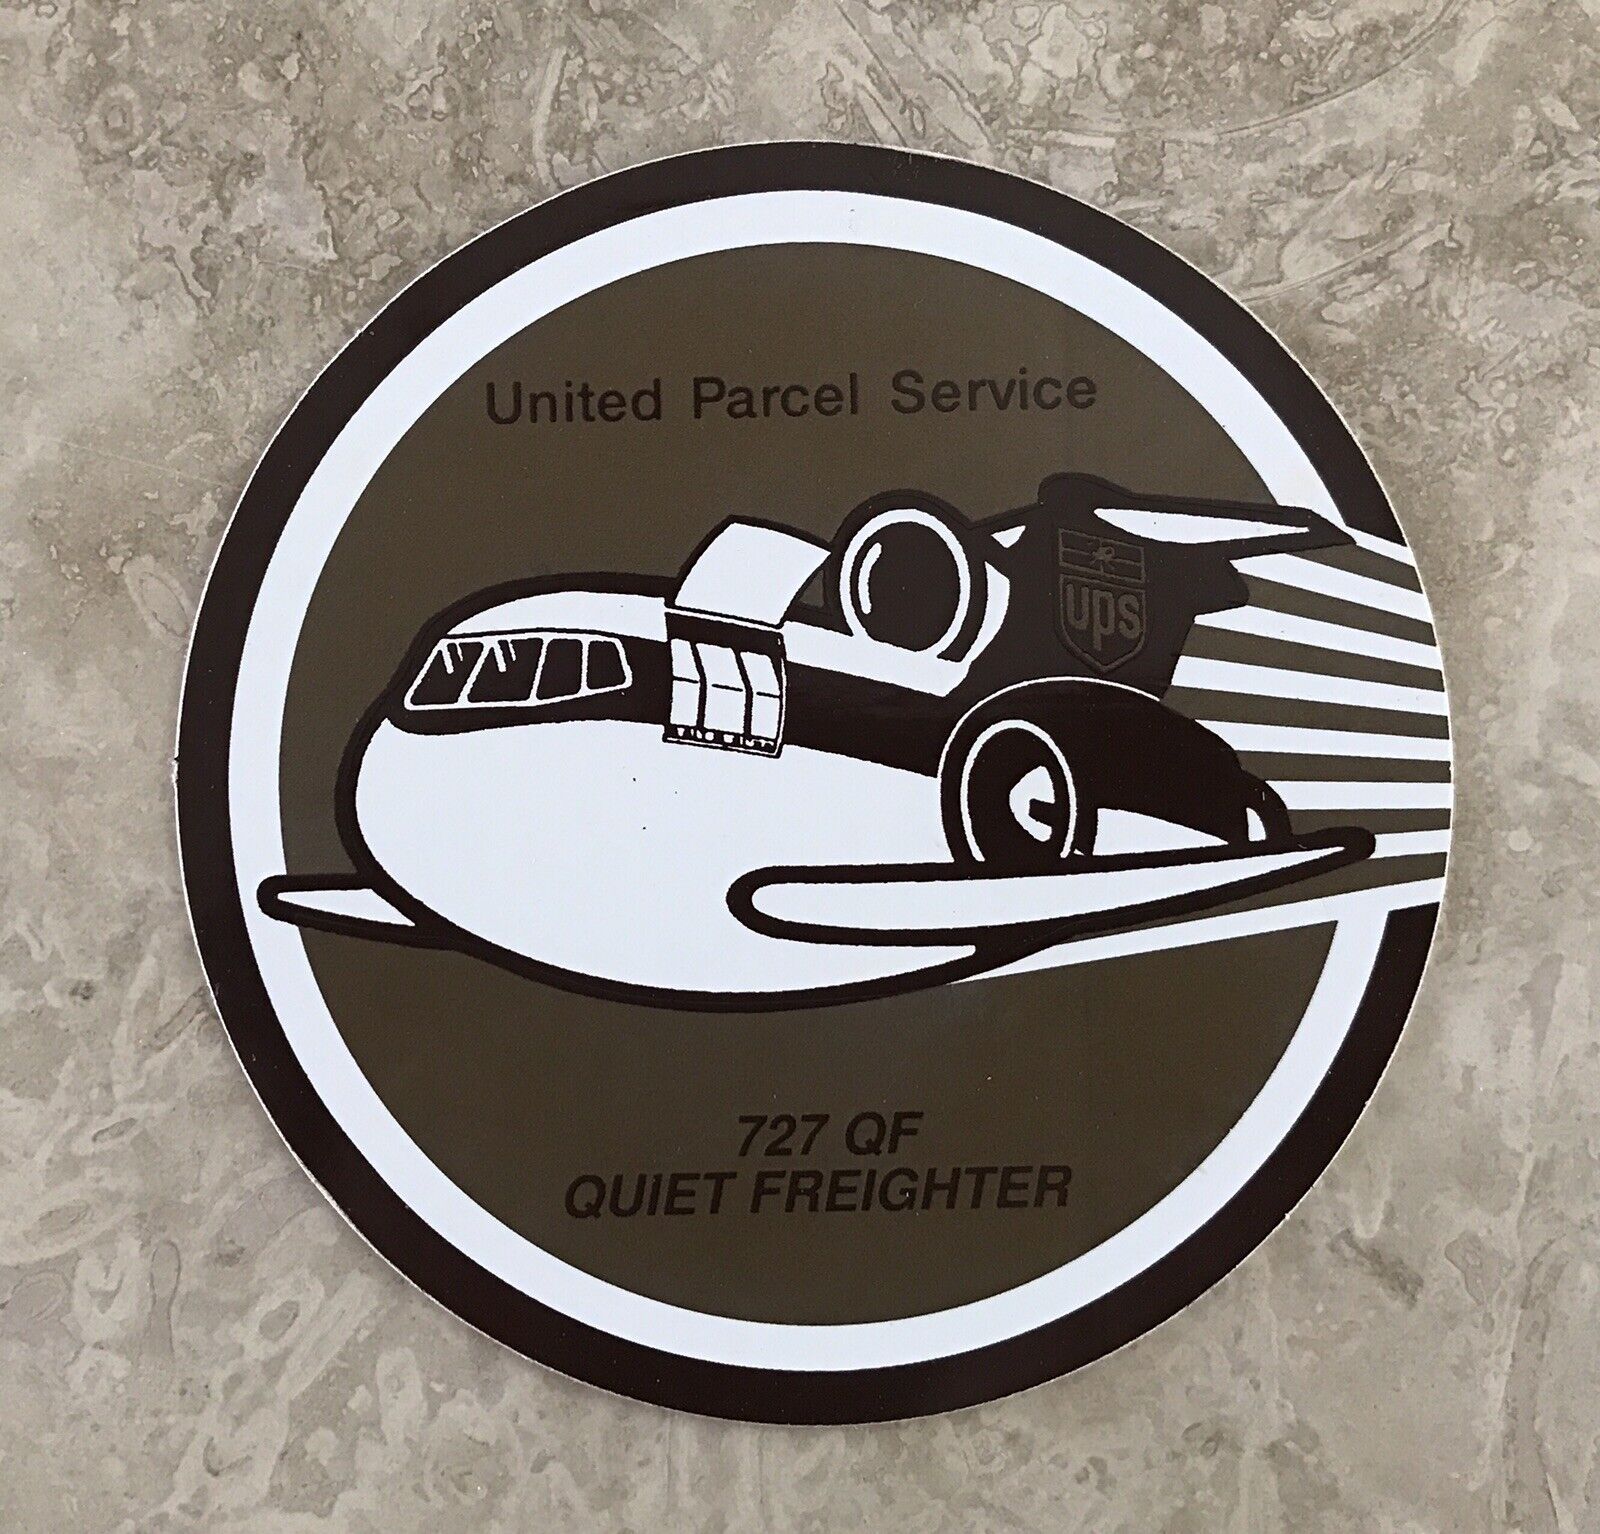 UPS UNITED PARCEL SERVICE Airlines B727 QF QUIET FREIGHTER Sticker/Decal Airline